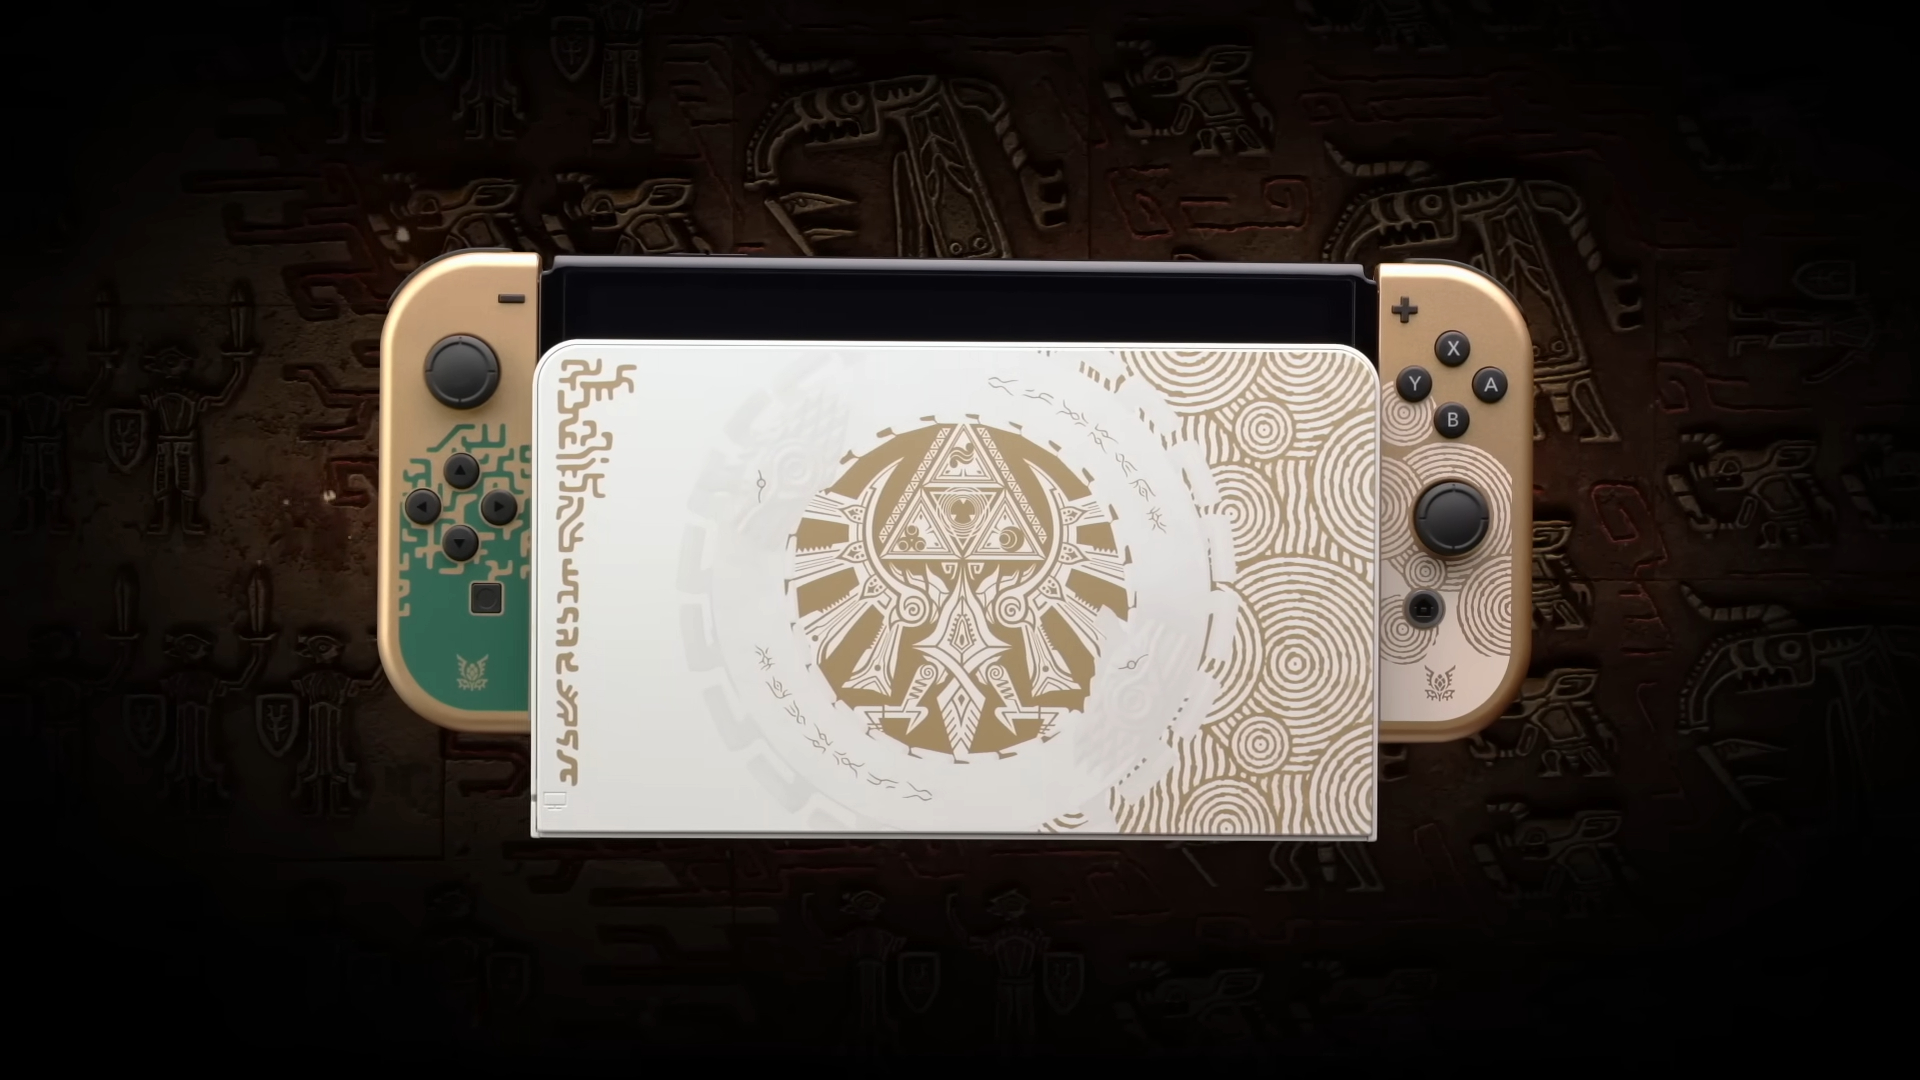 Where to Preorder the Legend of Zelda Nintendo Switch OLED Model